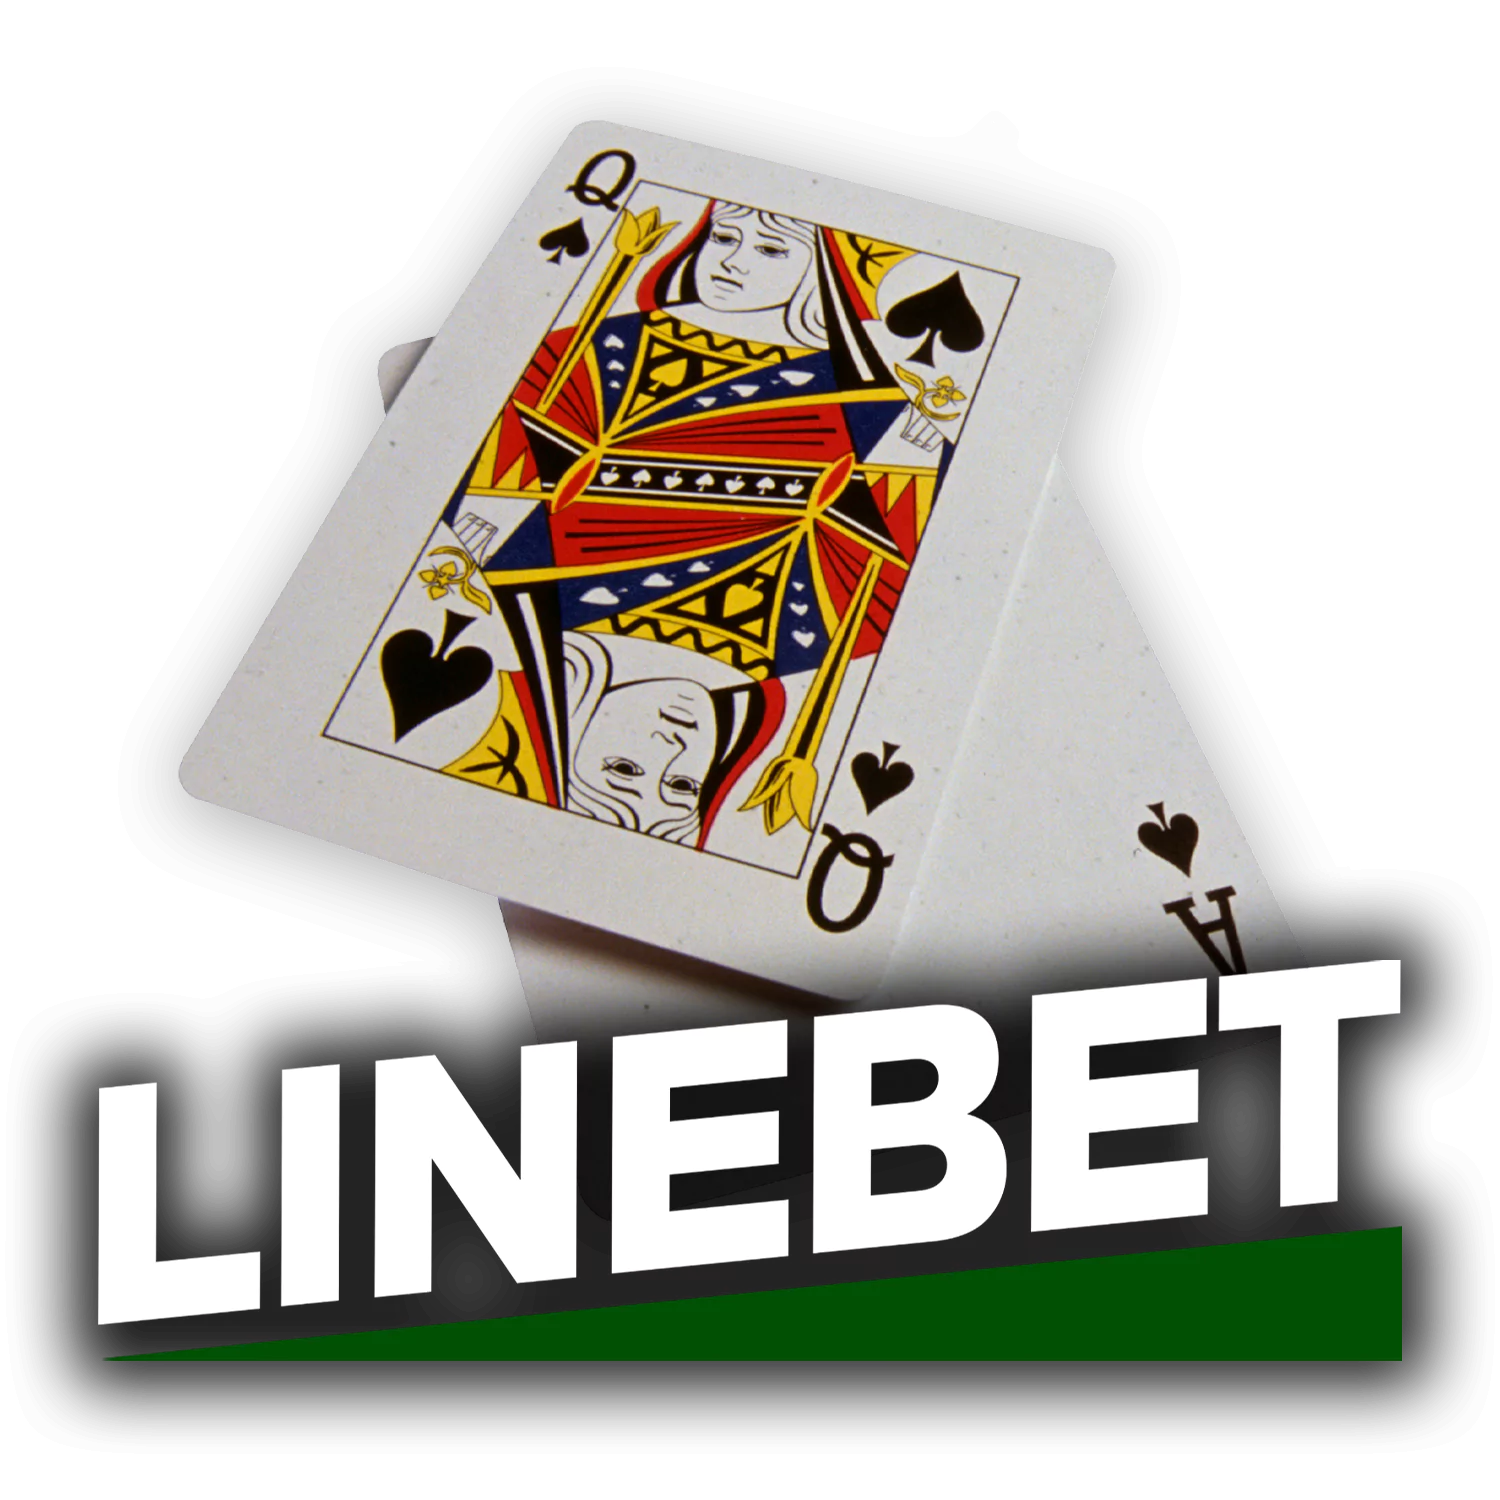 Learn how to play Andar Bahat on the Linebet site and in the app.